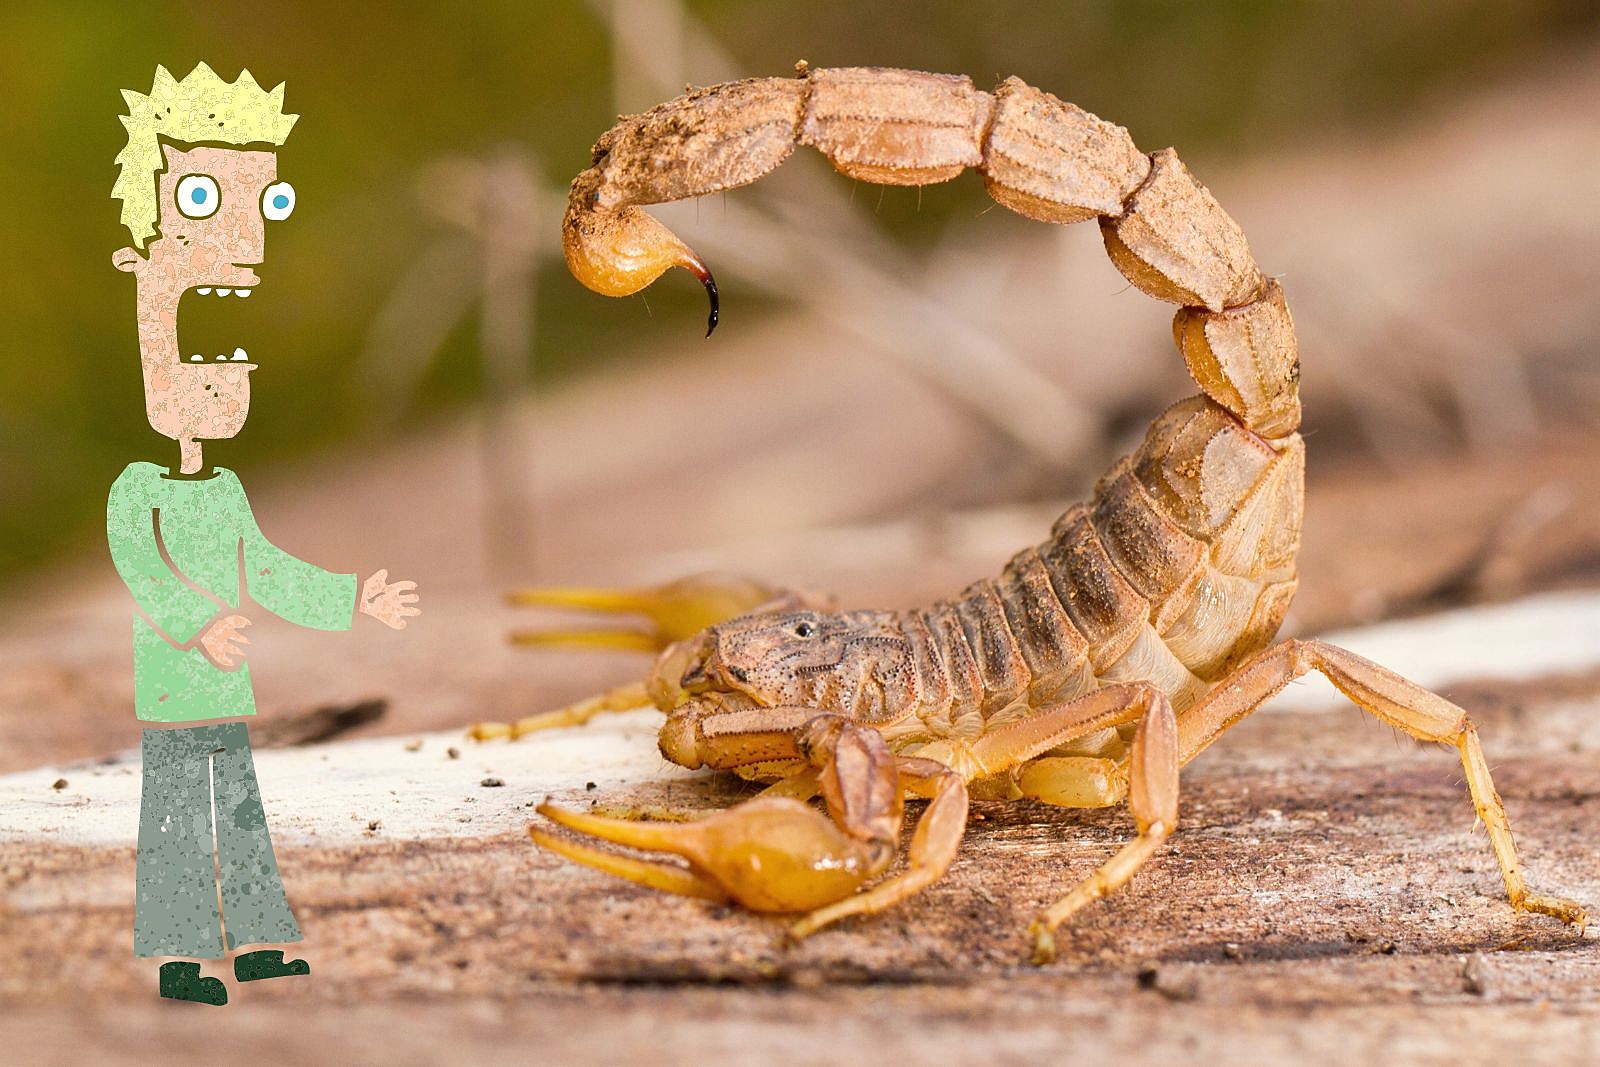 Some of the Most Common Scorpions You'll See in Texas [PHOTOS]